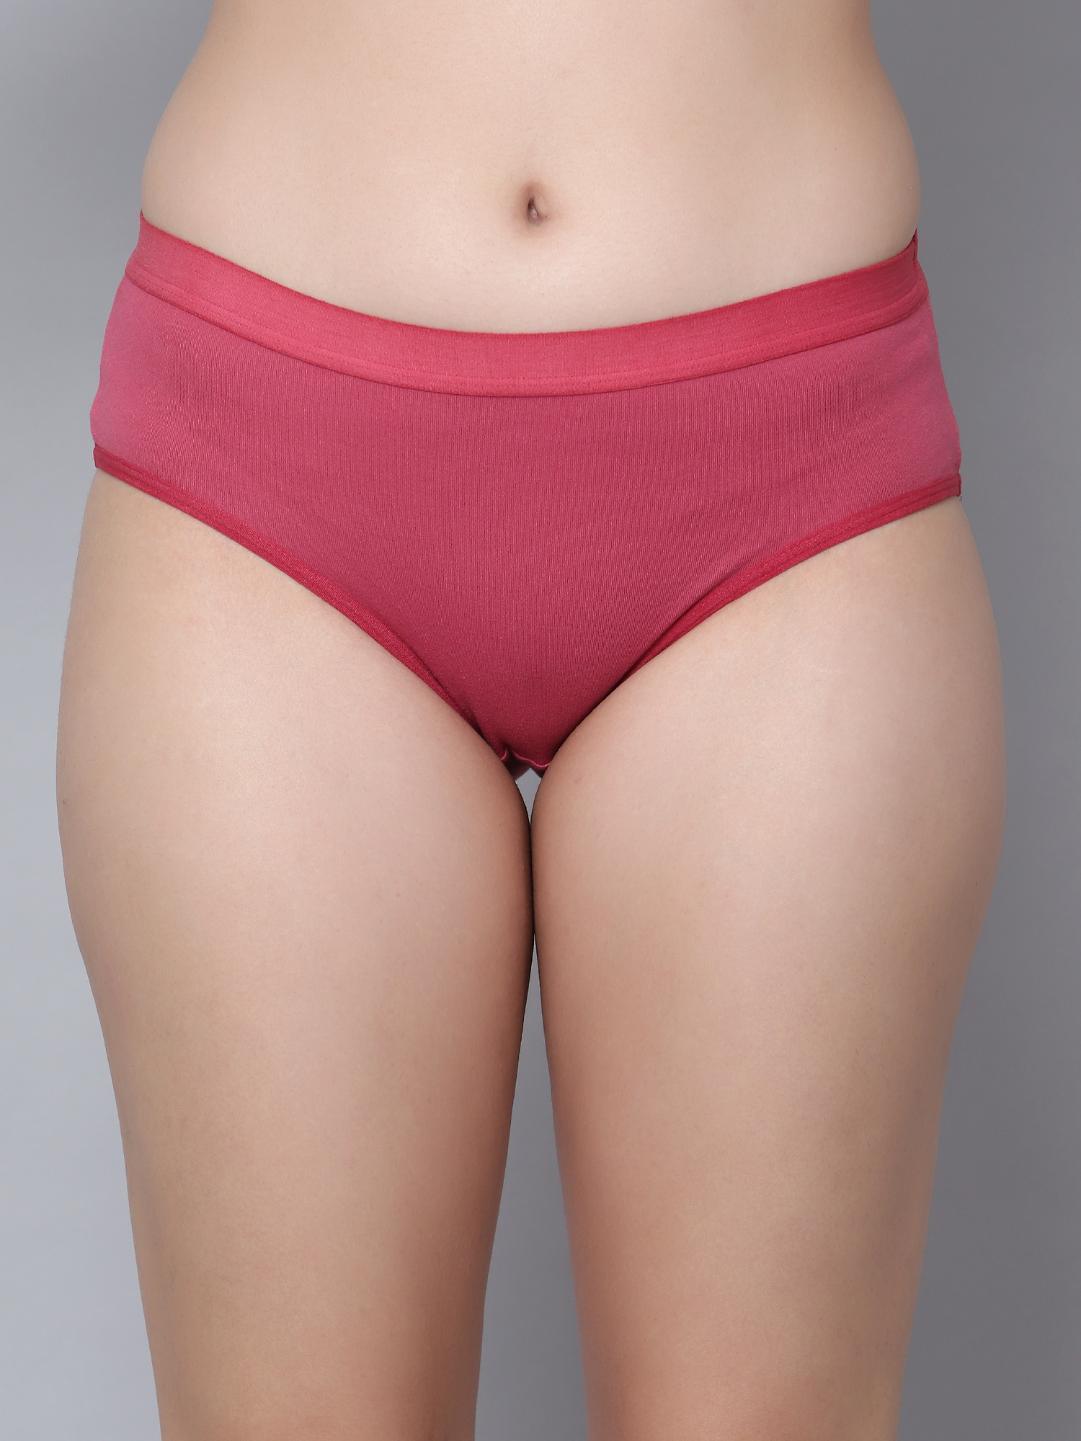 Women's Cotton Mid Waist Outer Elastic Panties Combo of 3 - Aimly.in